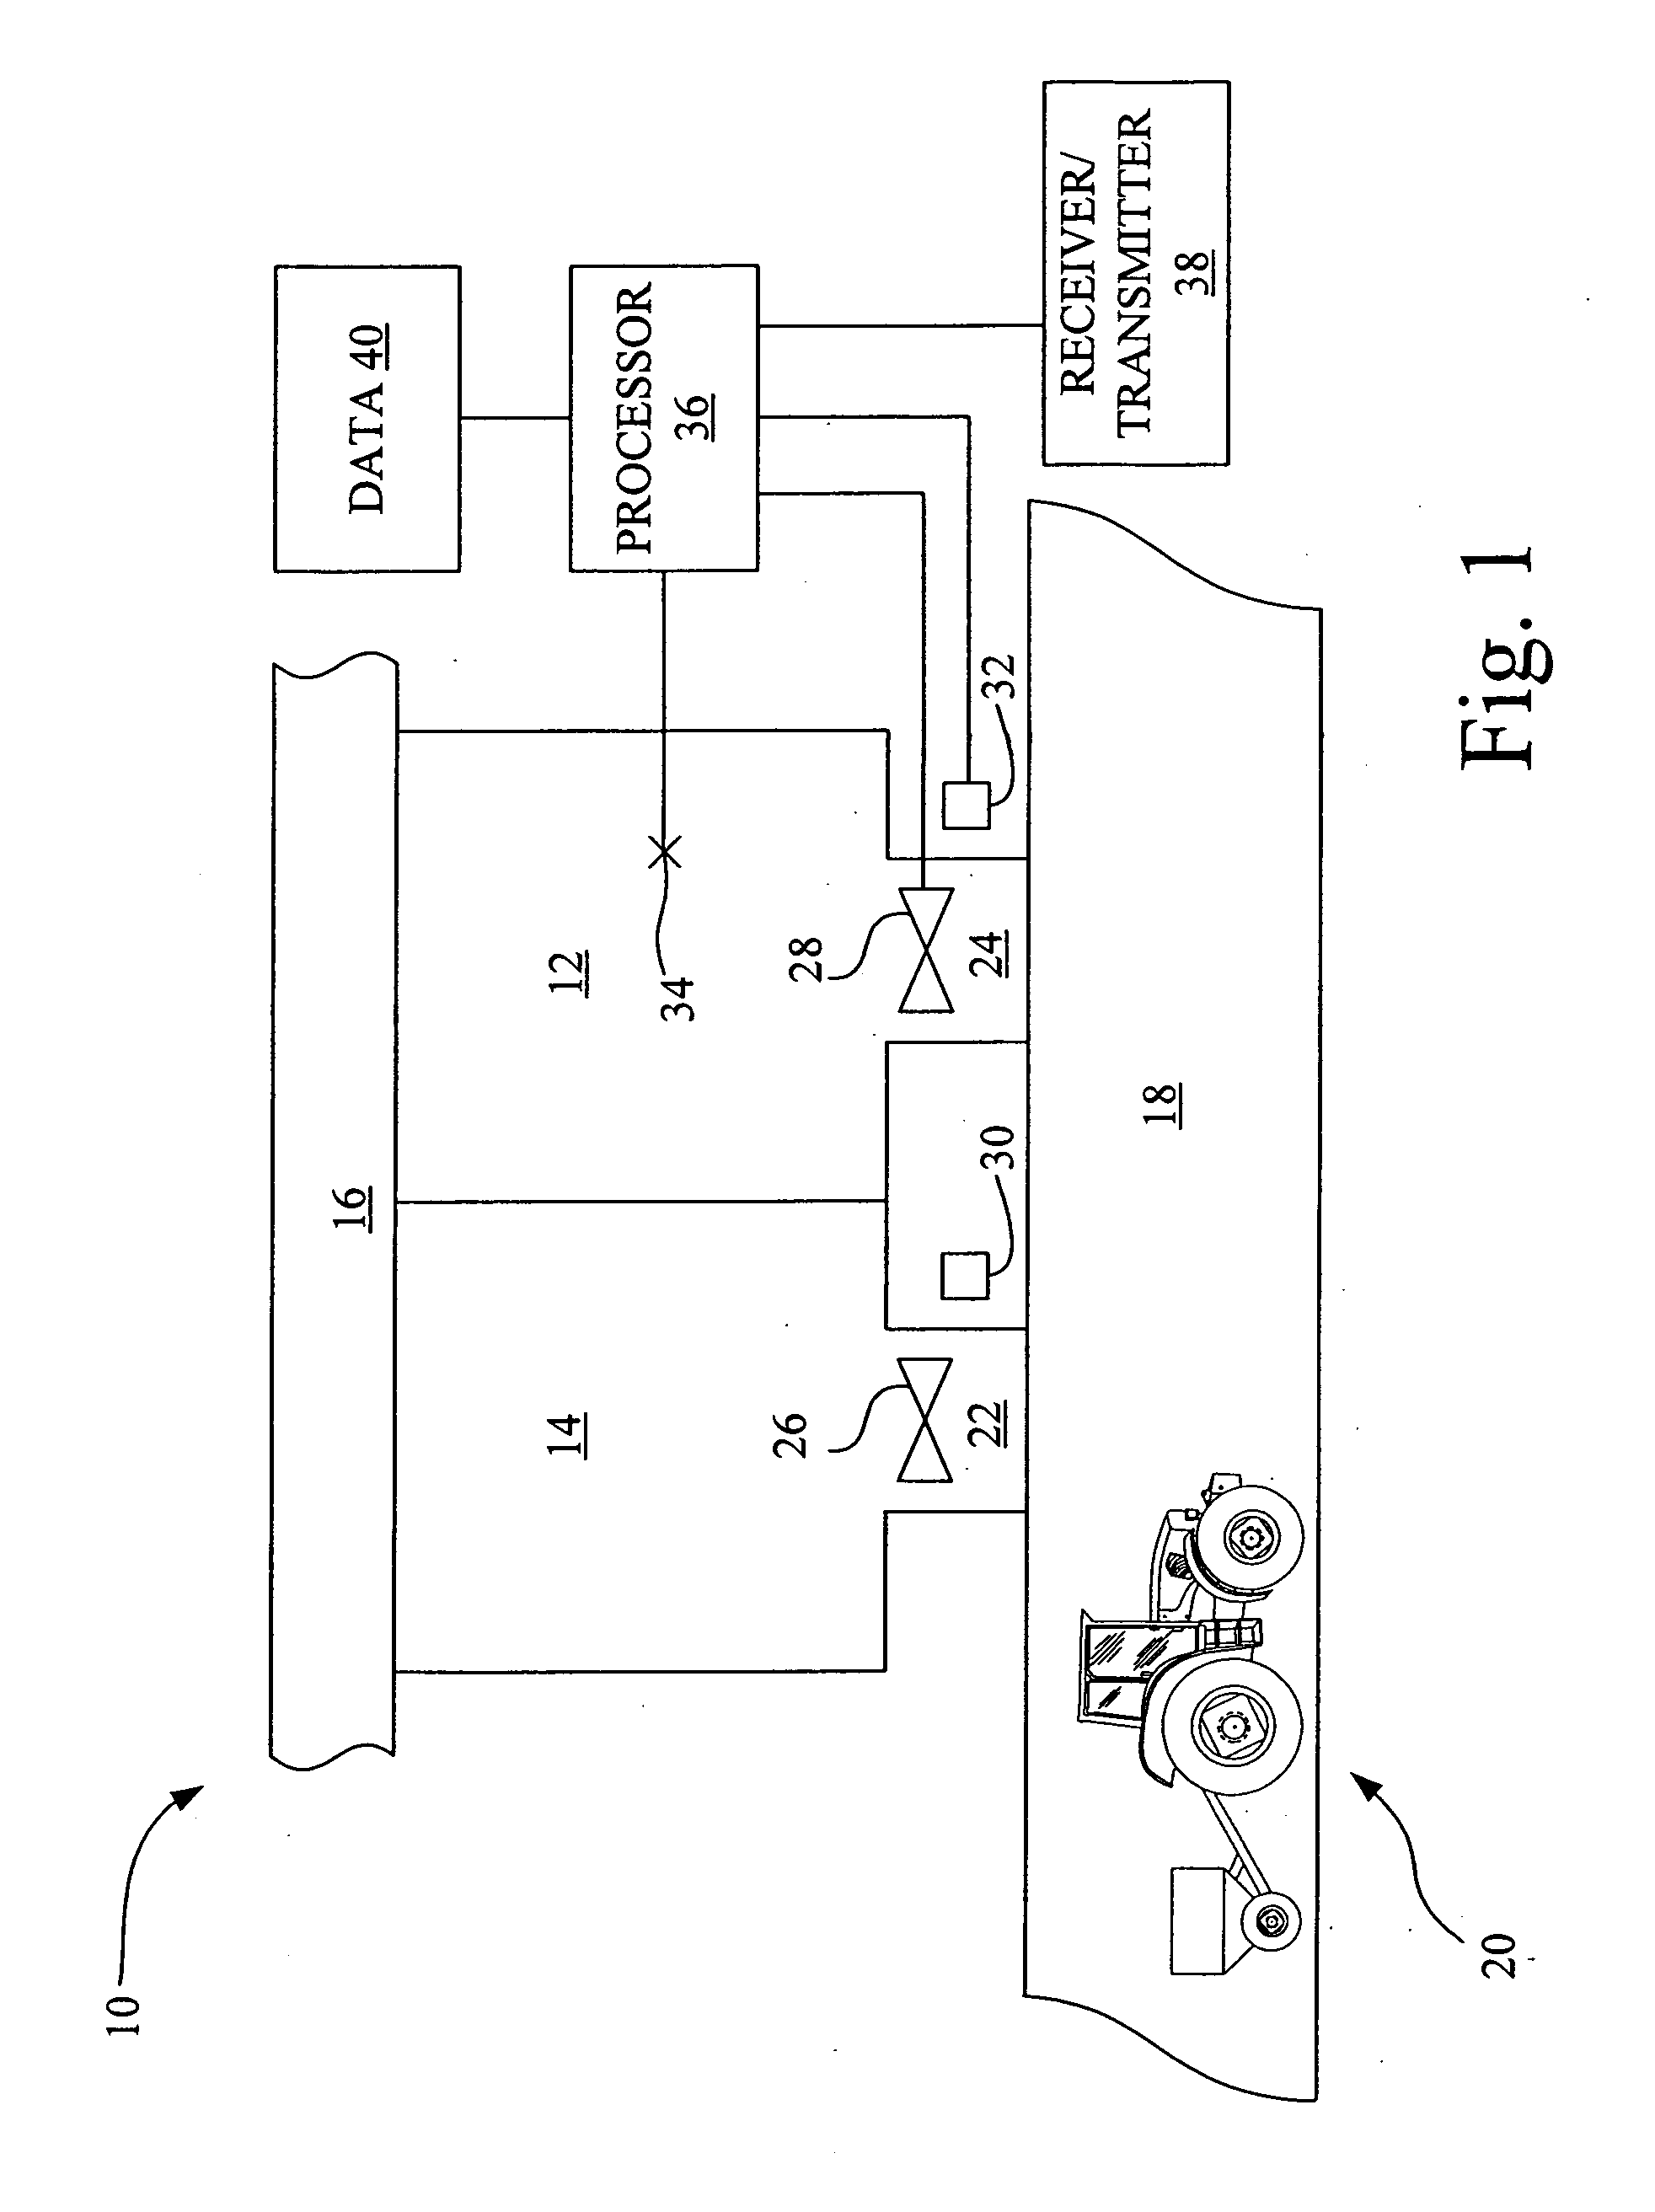 Method and system for determining suitability to enter a worksite and to perform an operation